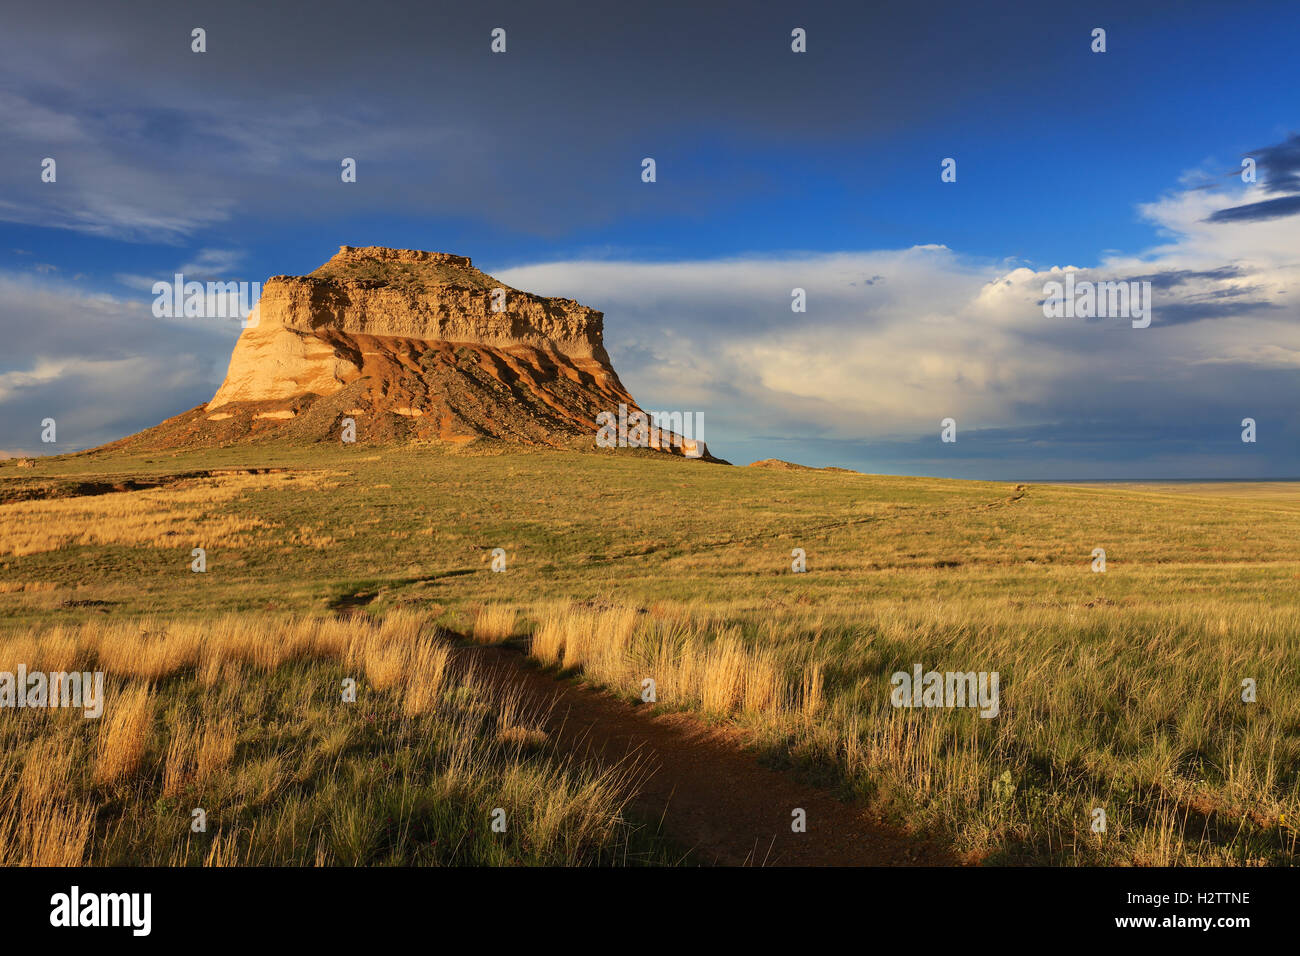 Hiking trail Pawnee Buttes National Grassland Colorado on American Great Plains Stock Photo